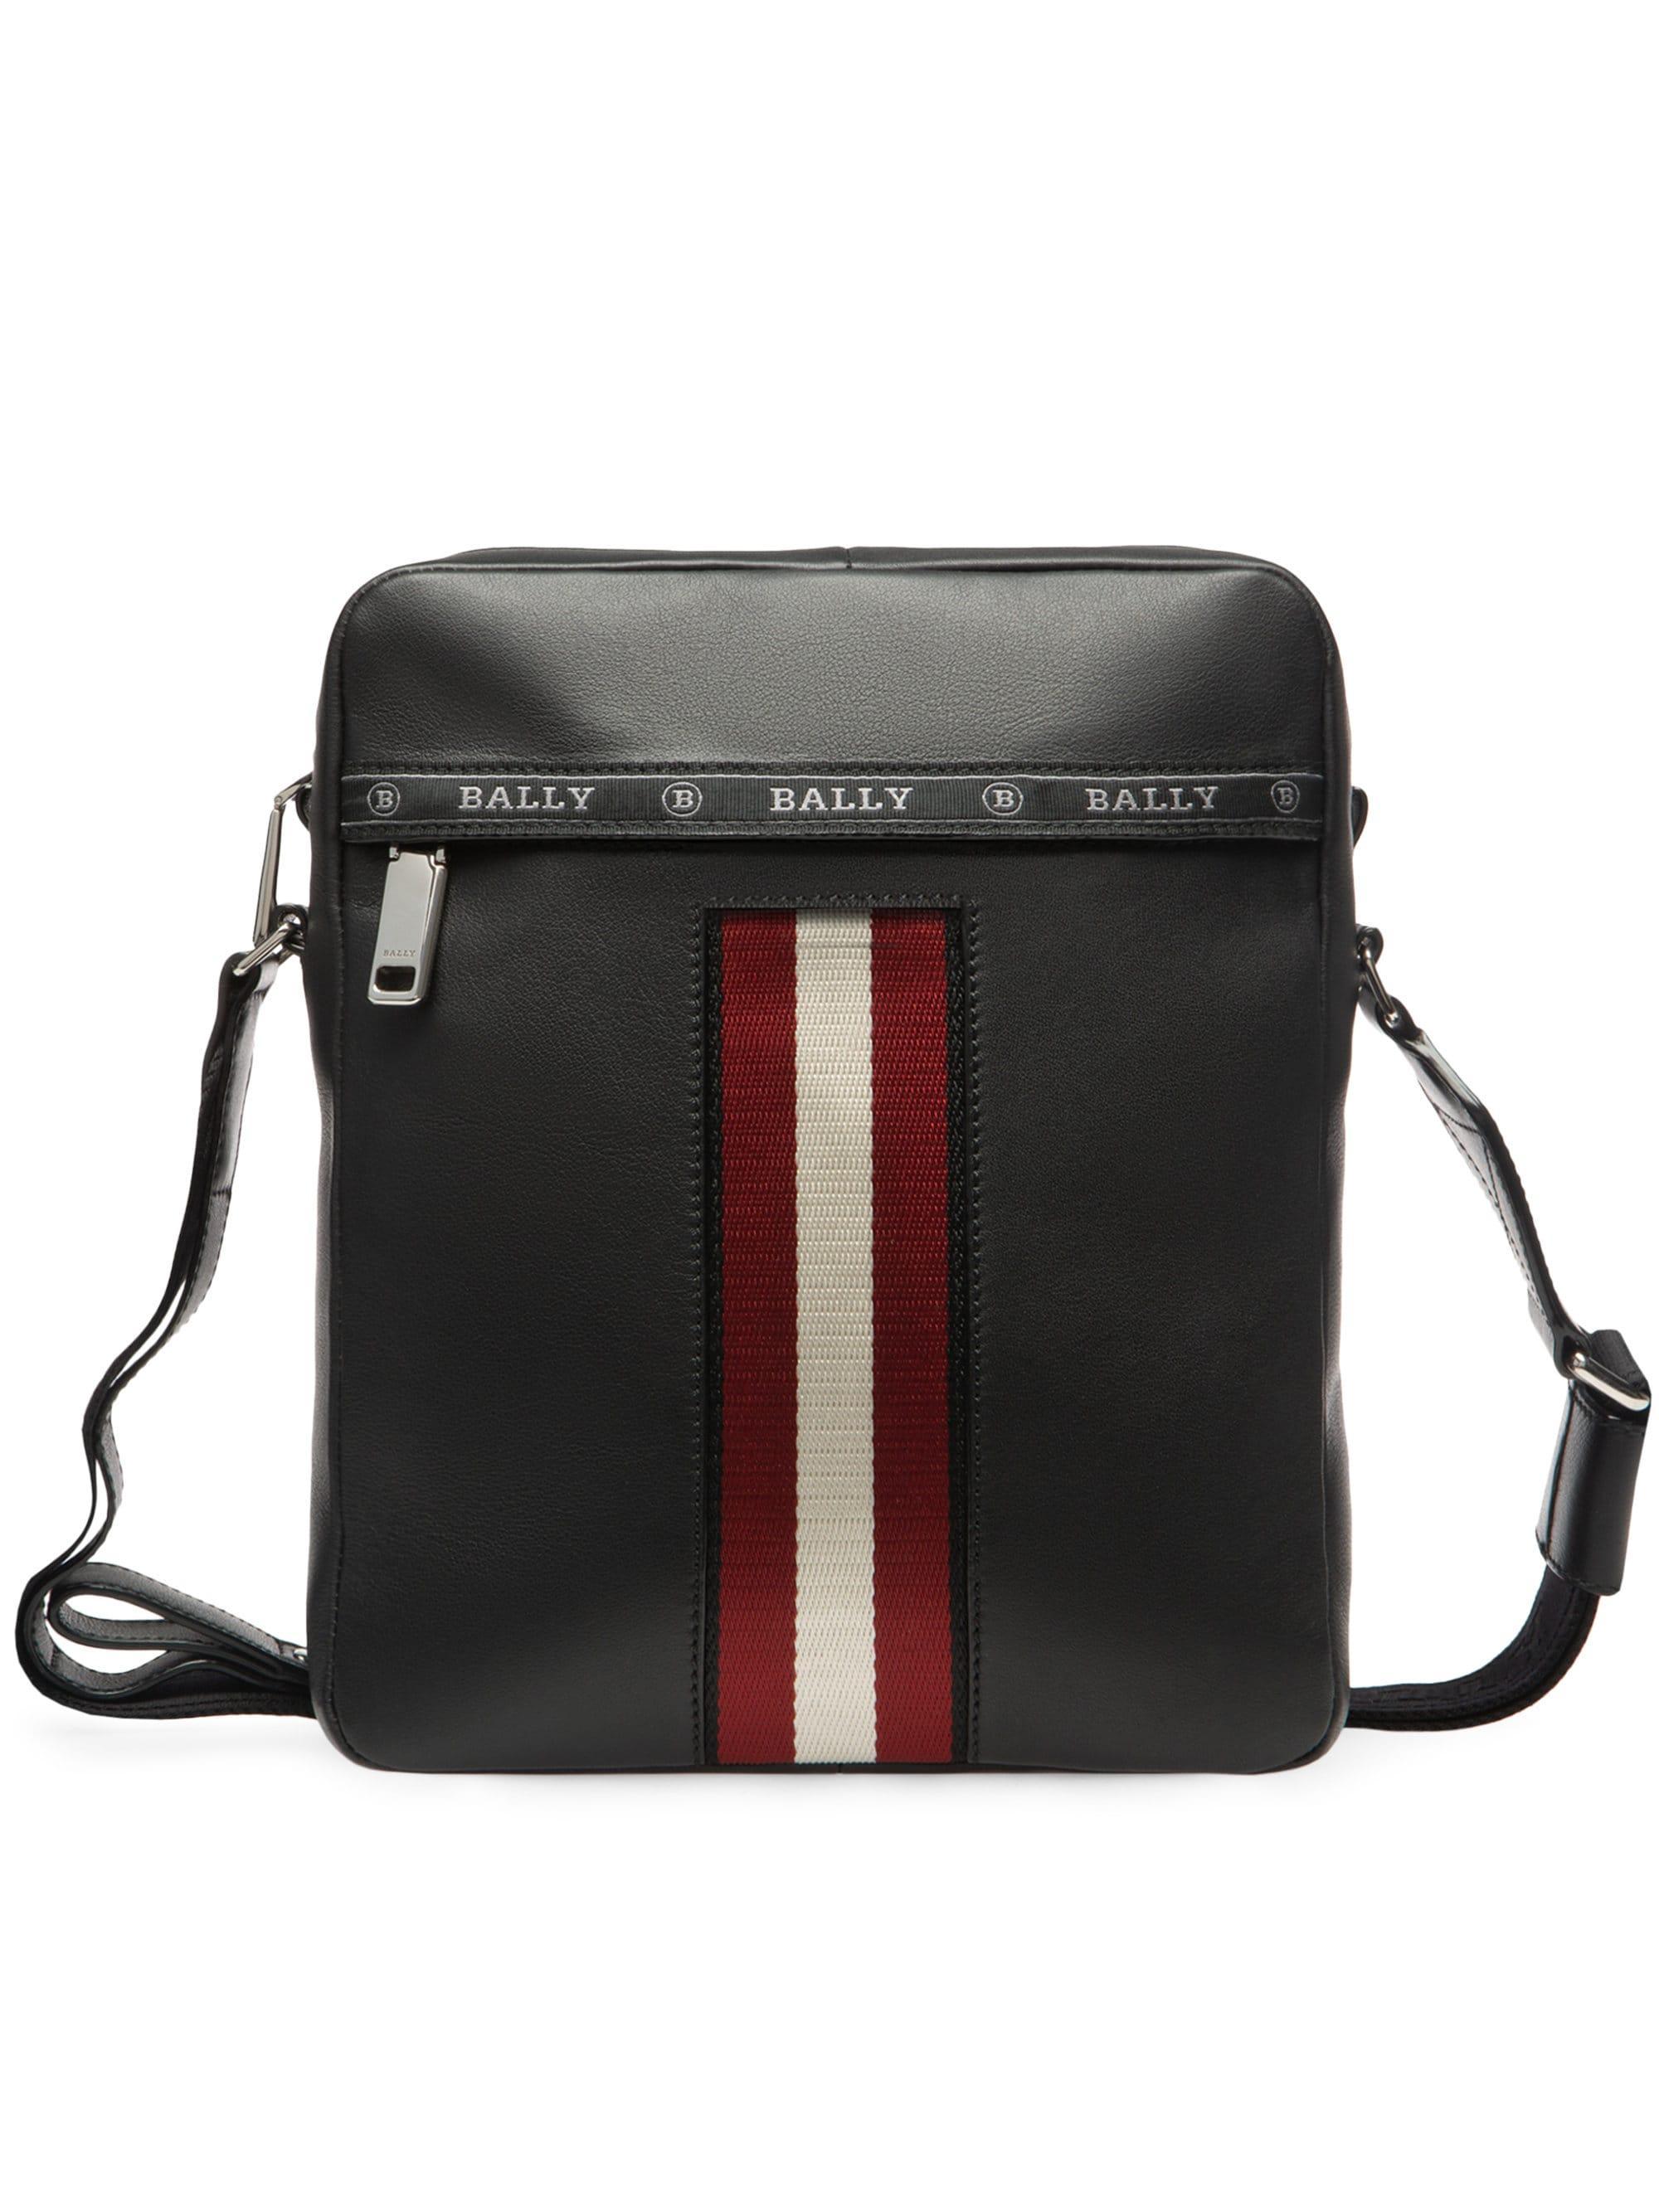 Bally High Point Holm Leather Crossbody Bag in Black for Men - Lyst